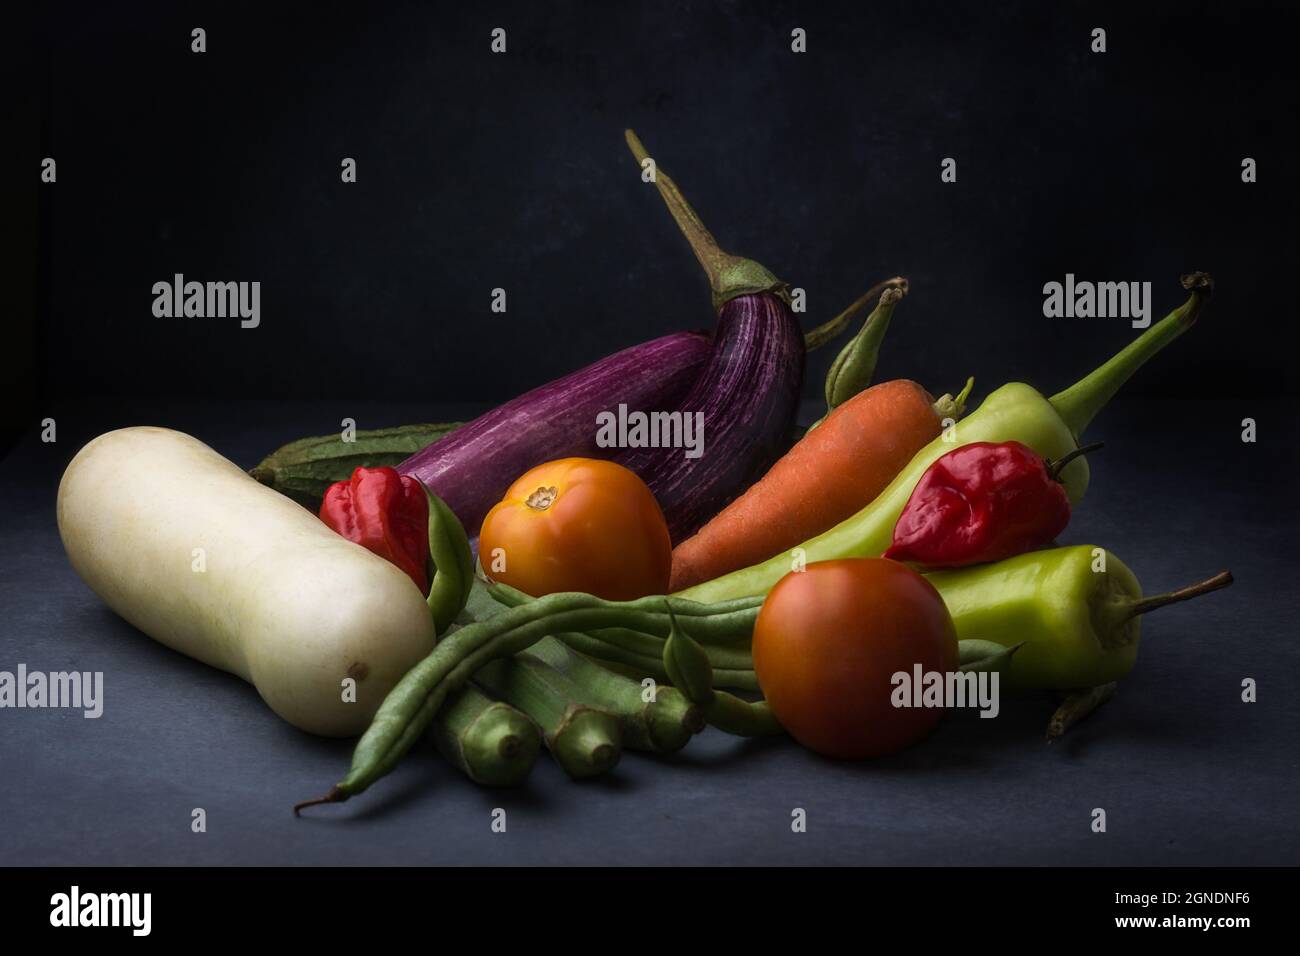 various organic vegetables on a dark textured surface, side view of eggplants, carrot, tomatoes, okra, cucumber and green chilies Stock Photo